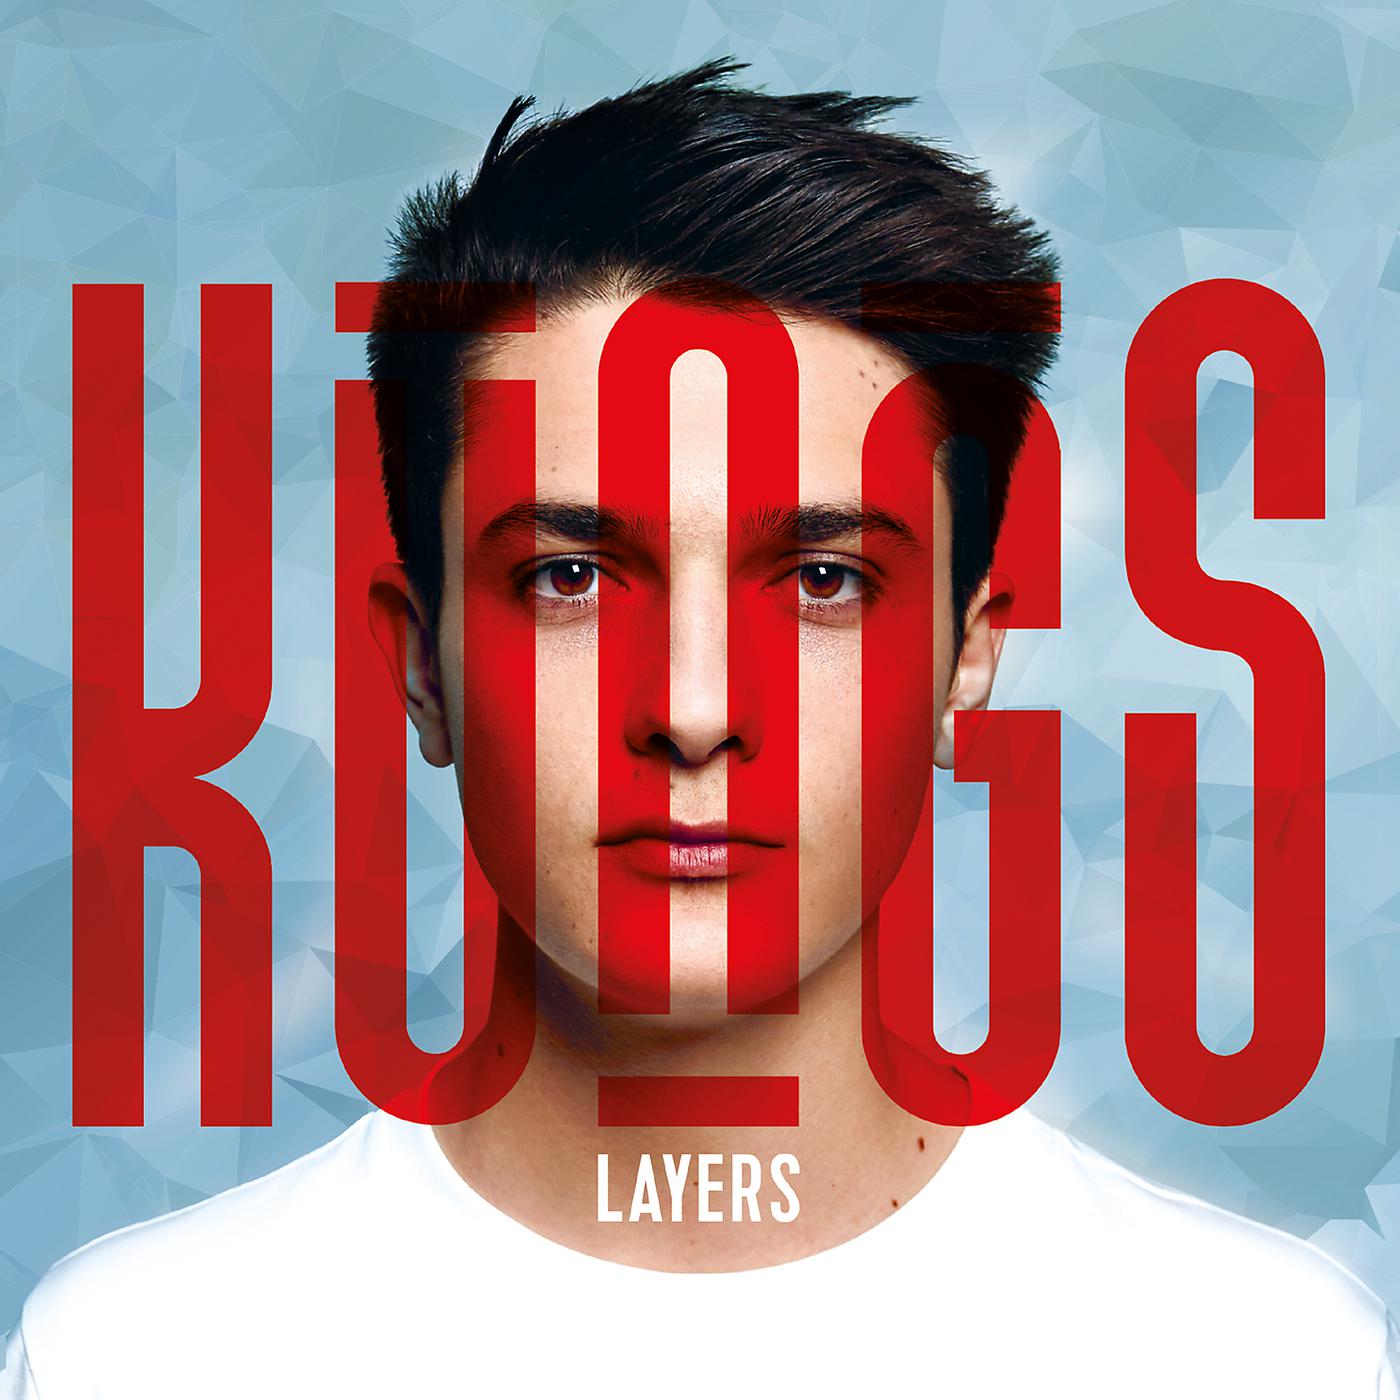 3 never going home. Kungs. I feel so Bad (Kungs, Ephemerals). Kungs Substitution. Обложка i feel Bad.